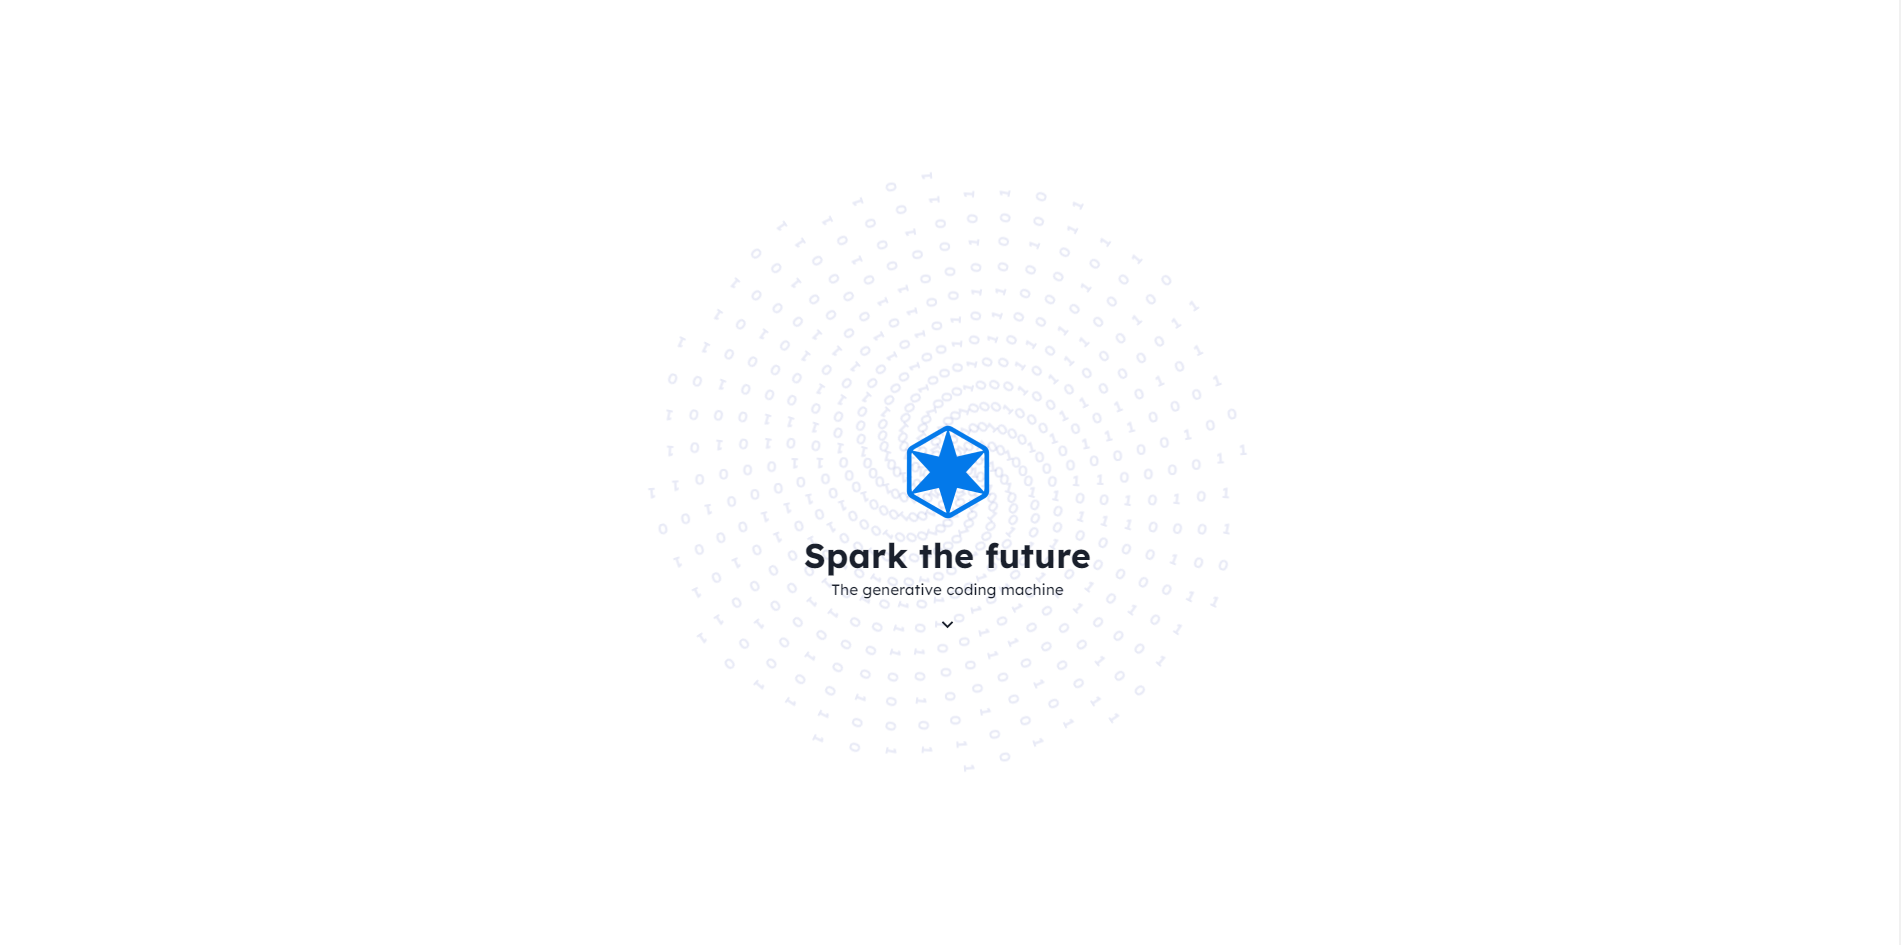 sparkengine.ai | Unlike autocompletion AIs, Spark Engine is a generative coding machine. It uses trained AI models fed with countless code snippets and documentations to help automate the programming process in a completely different way.